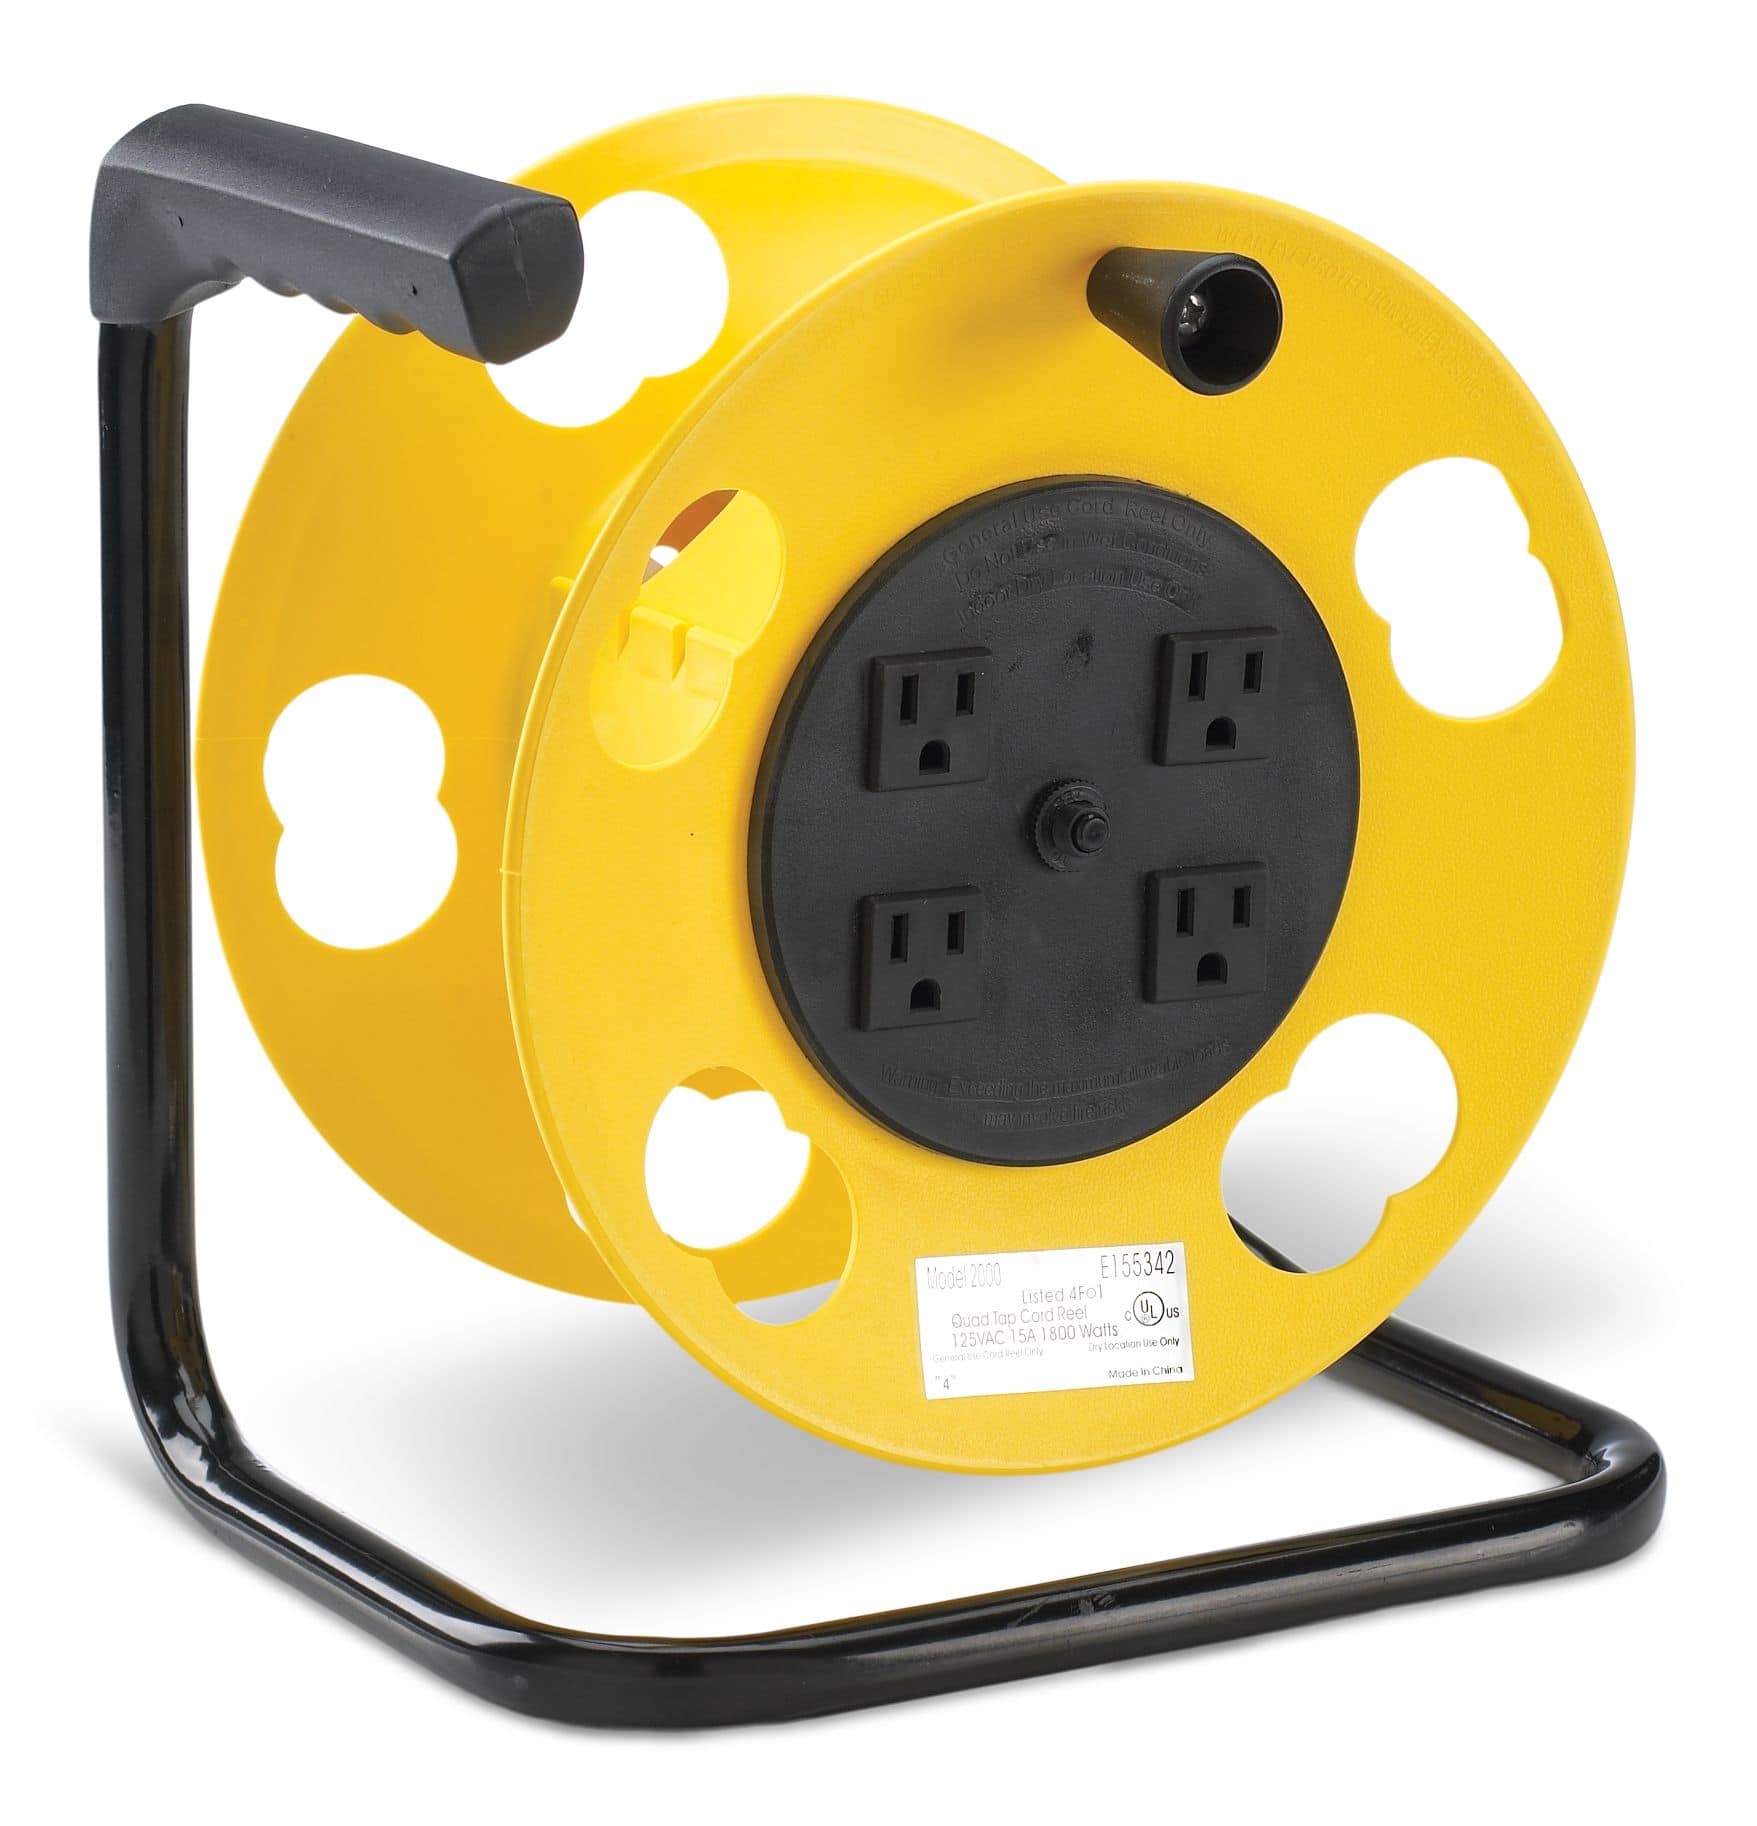 NOMA 100-ft Extension Cord Storage Reel with 4 Grounded Outlets and Circuit  Breaker